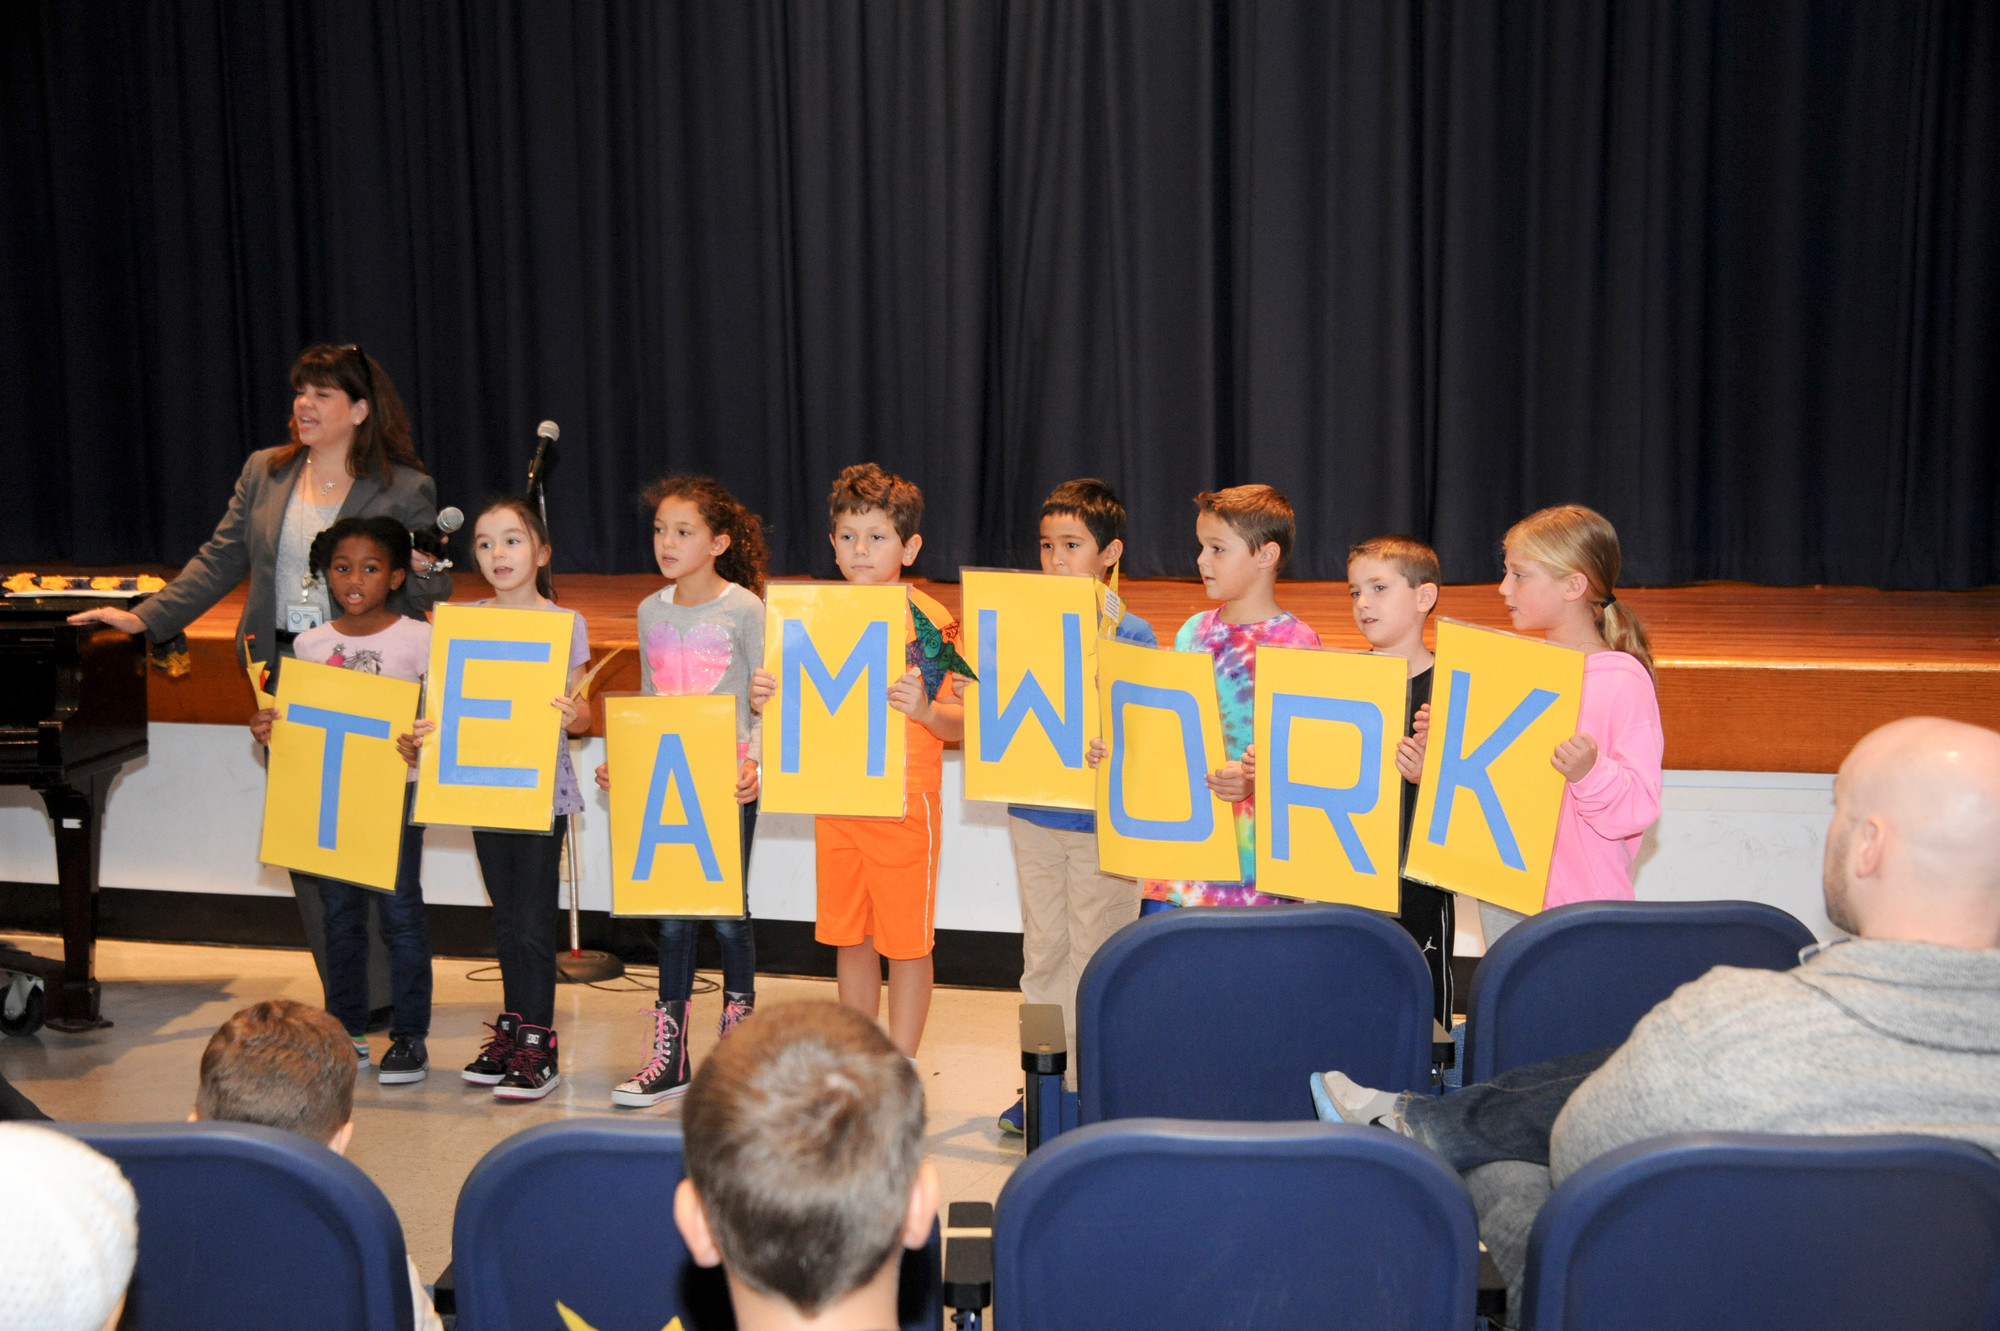 Students learned about the Bellmore School District’s core values, including teamwork, at the Reinhard Rising Star Pep Rally on Oct. 2.